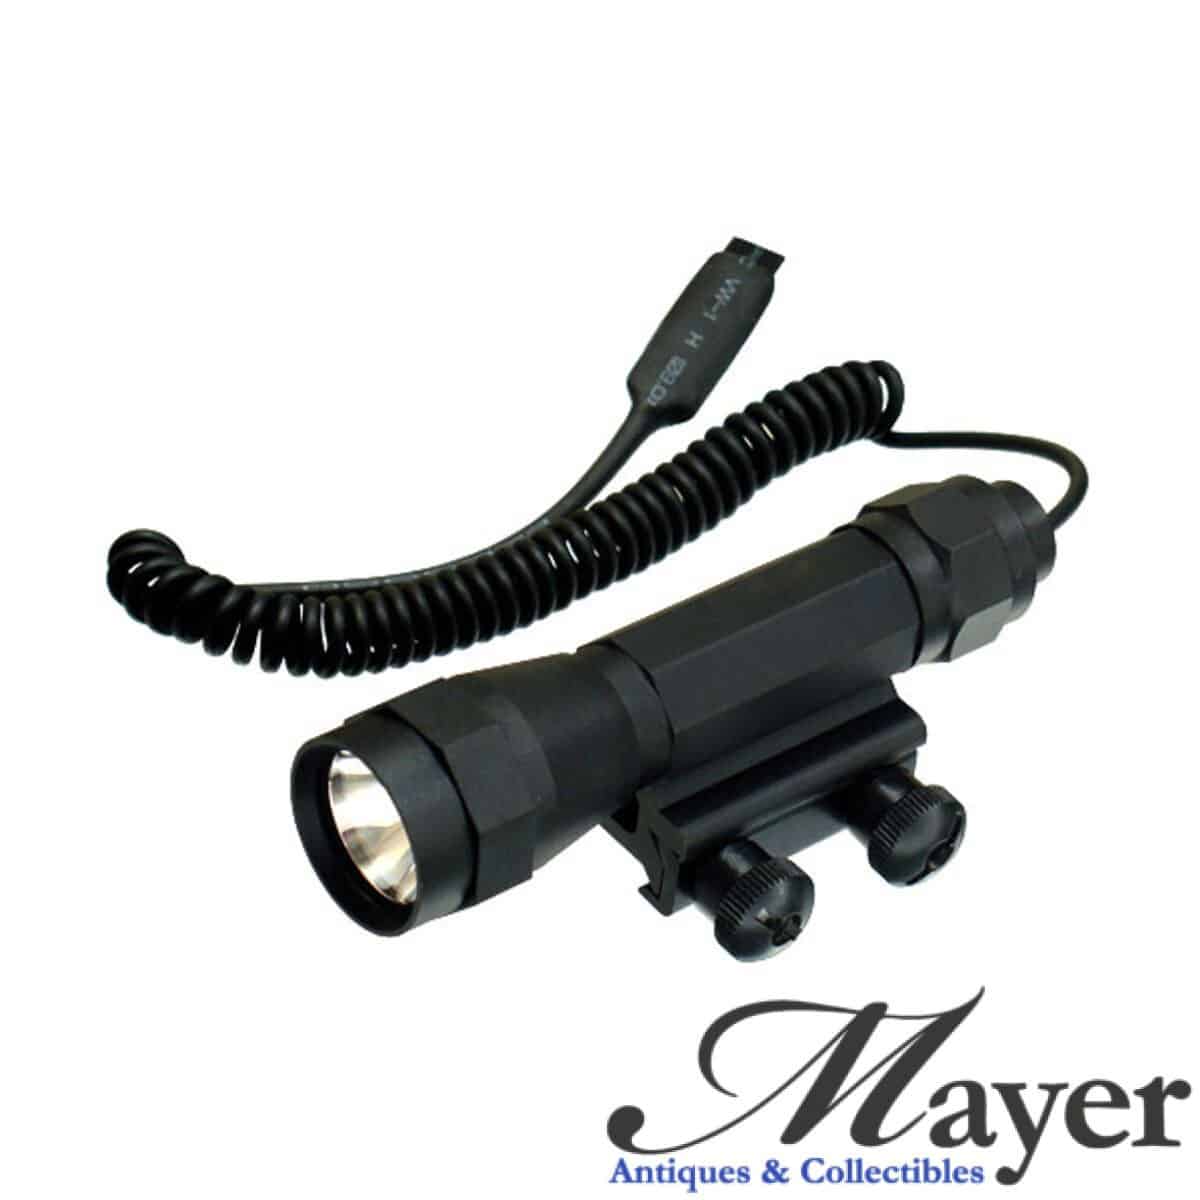 Leapers UTG model LT-TL101 tactical flashlight with integral rifle mount and PTT cable remote pressure on/off switch.